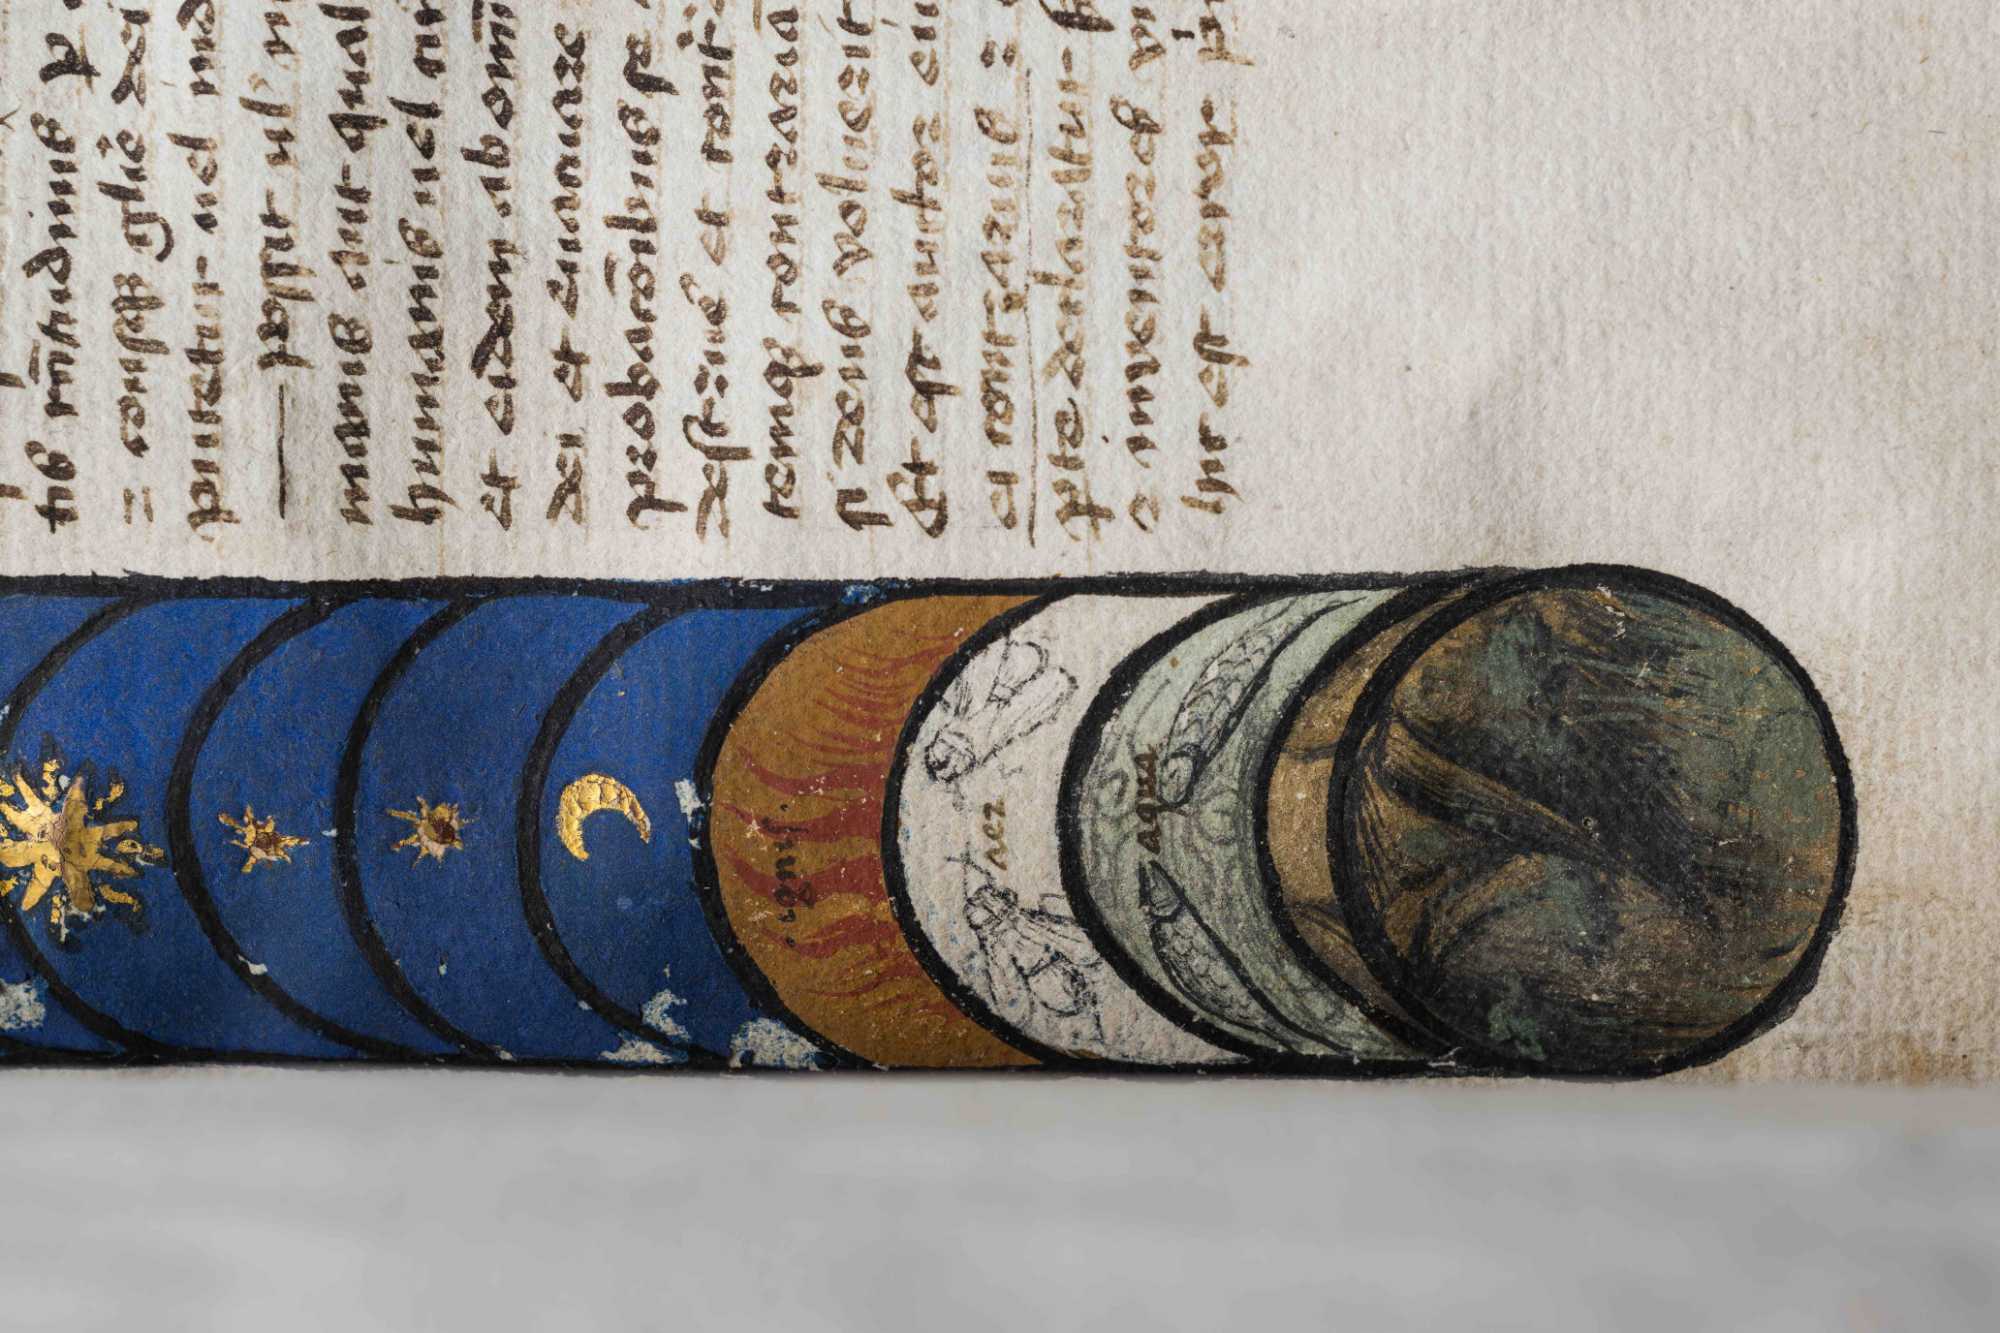 Close-up of the illumination on the first page of the medieval text 